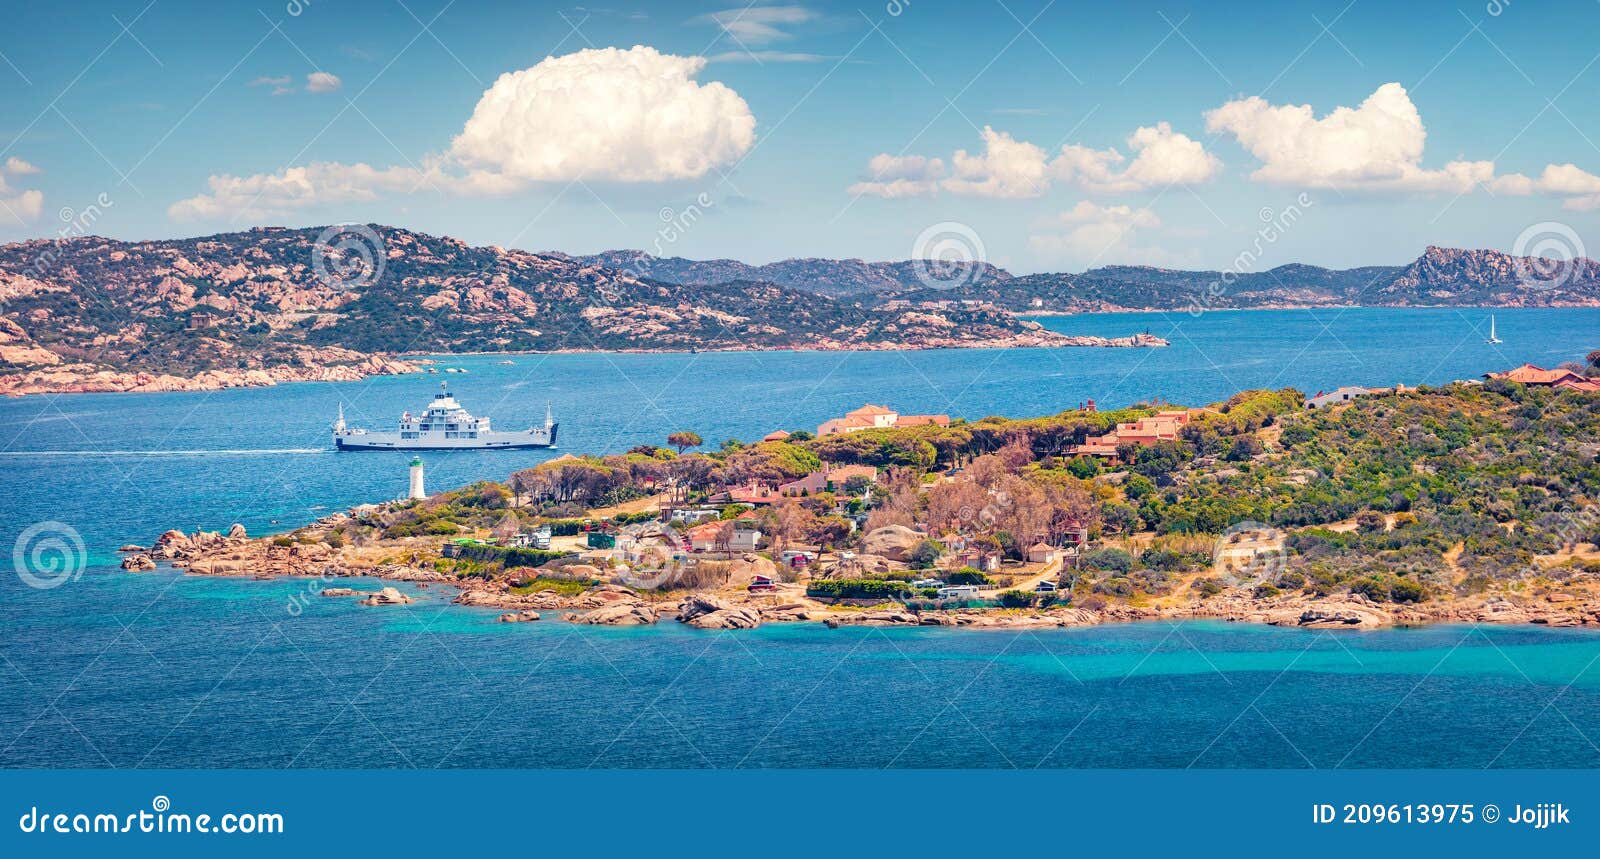 panoramic summer view of palau town, province of olbia-tempio, italy, europe. sunny morning view of sardinia island. picturesque s